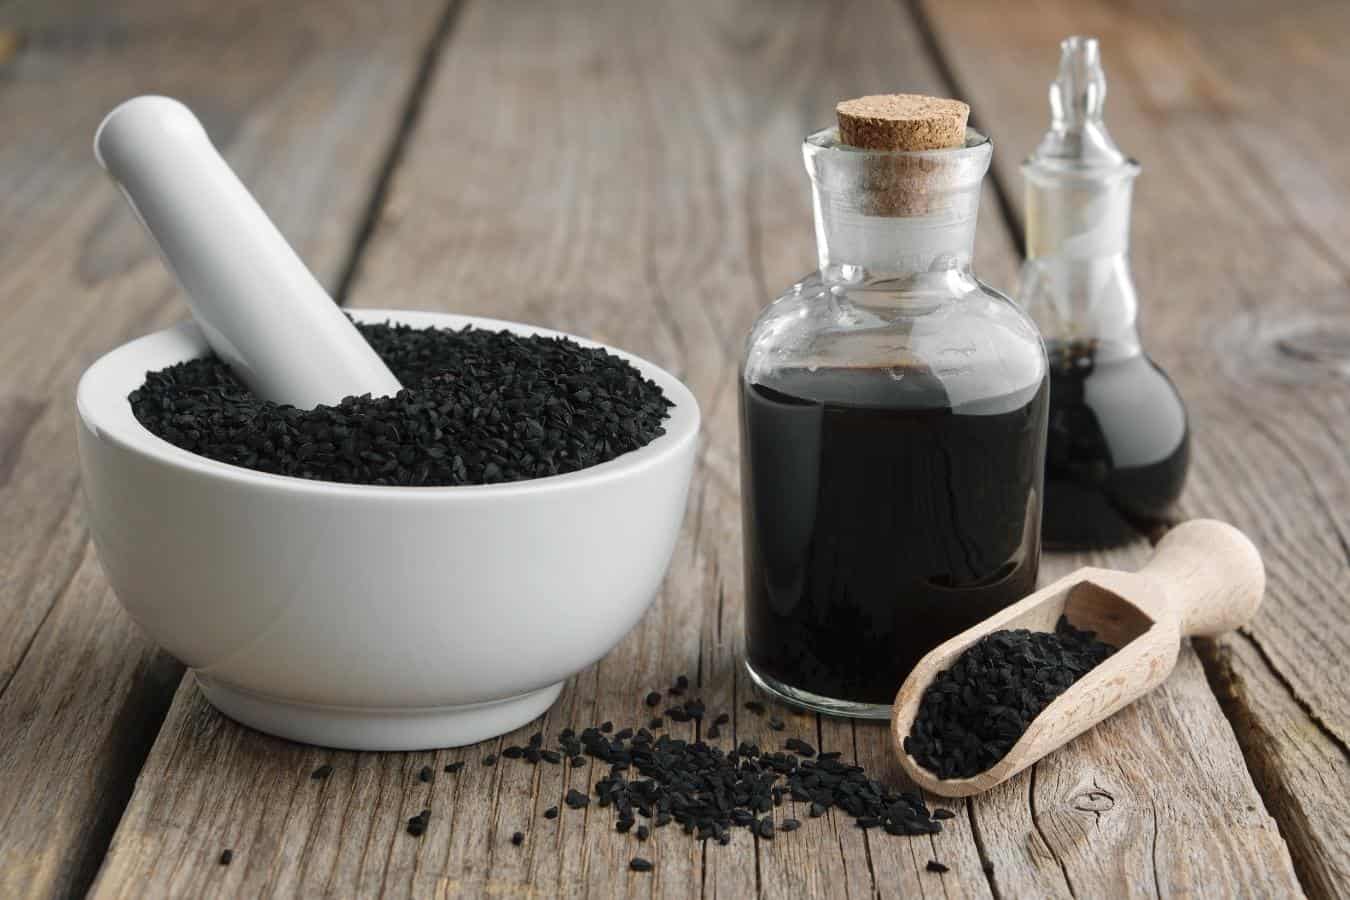 How Do You Use Black Seed Oil For Hair